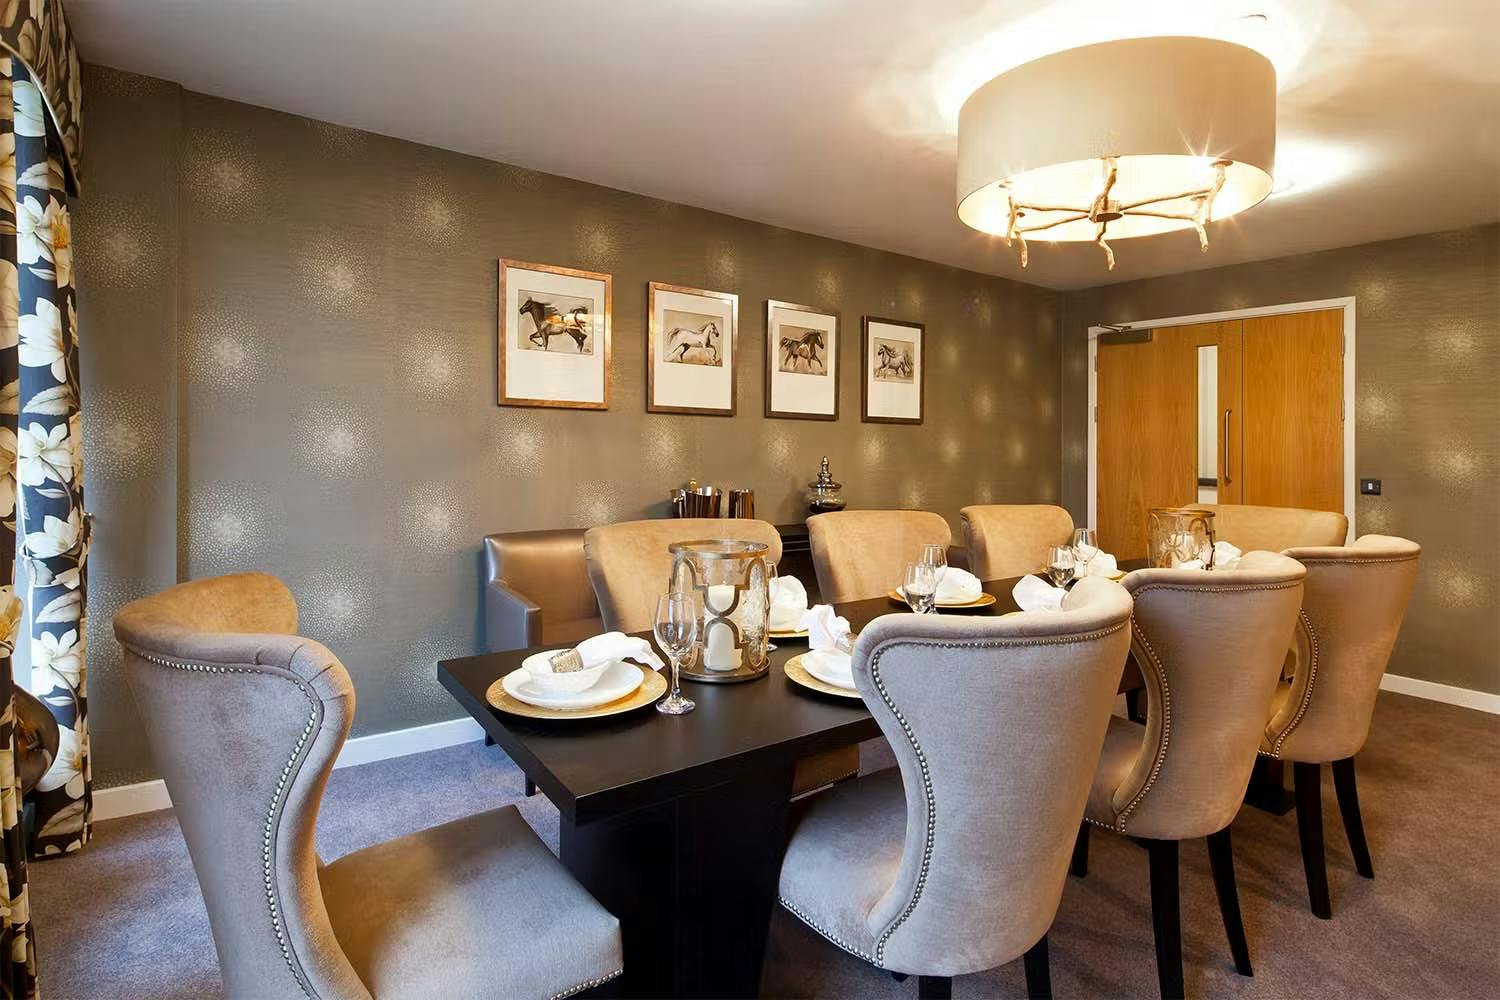 Dining area of Ty Llandaff care home in Cardiff, Wales